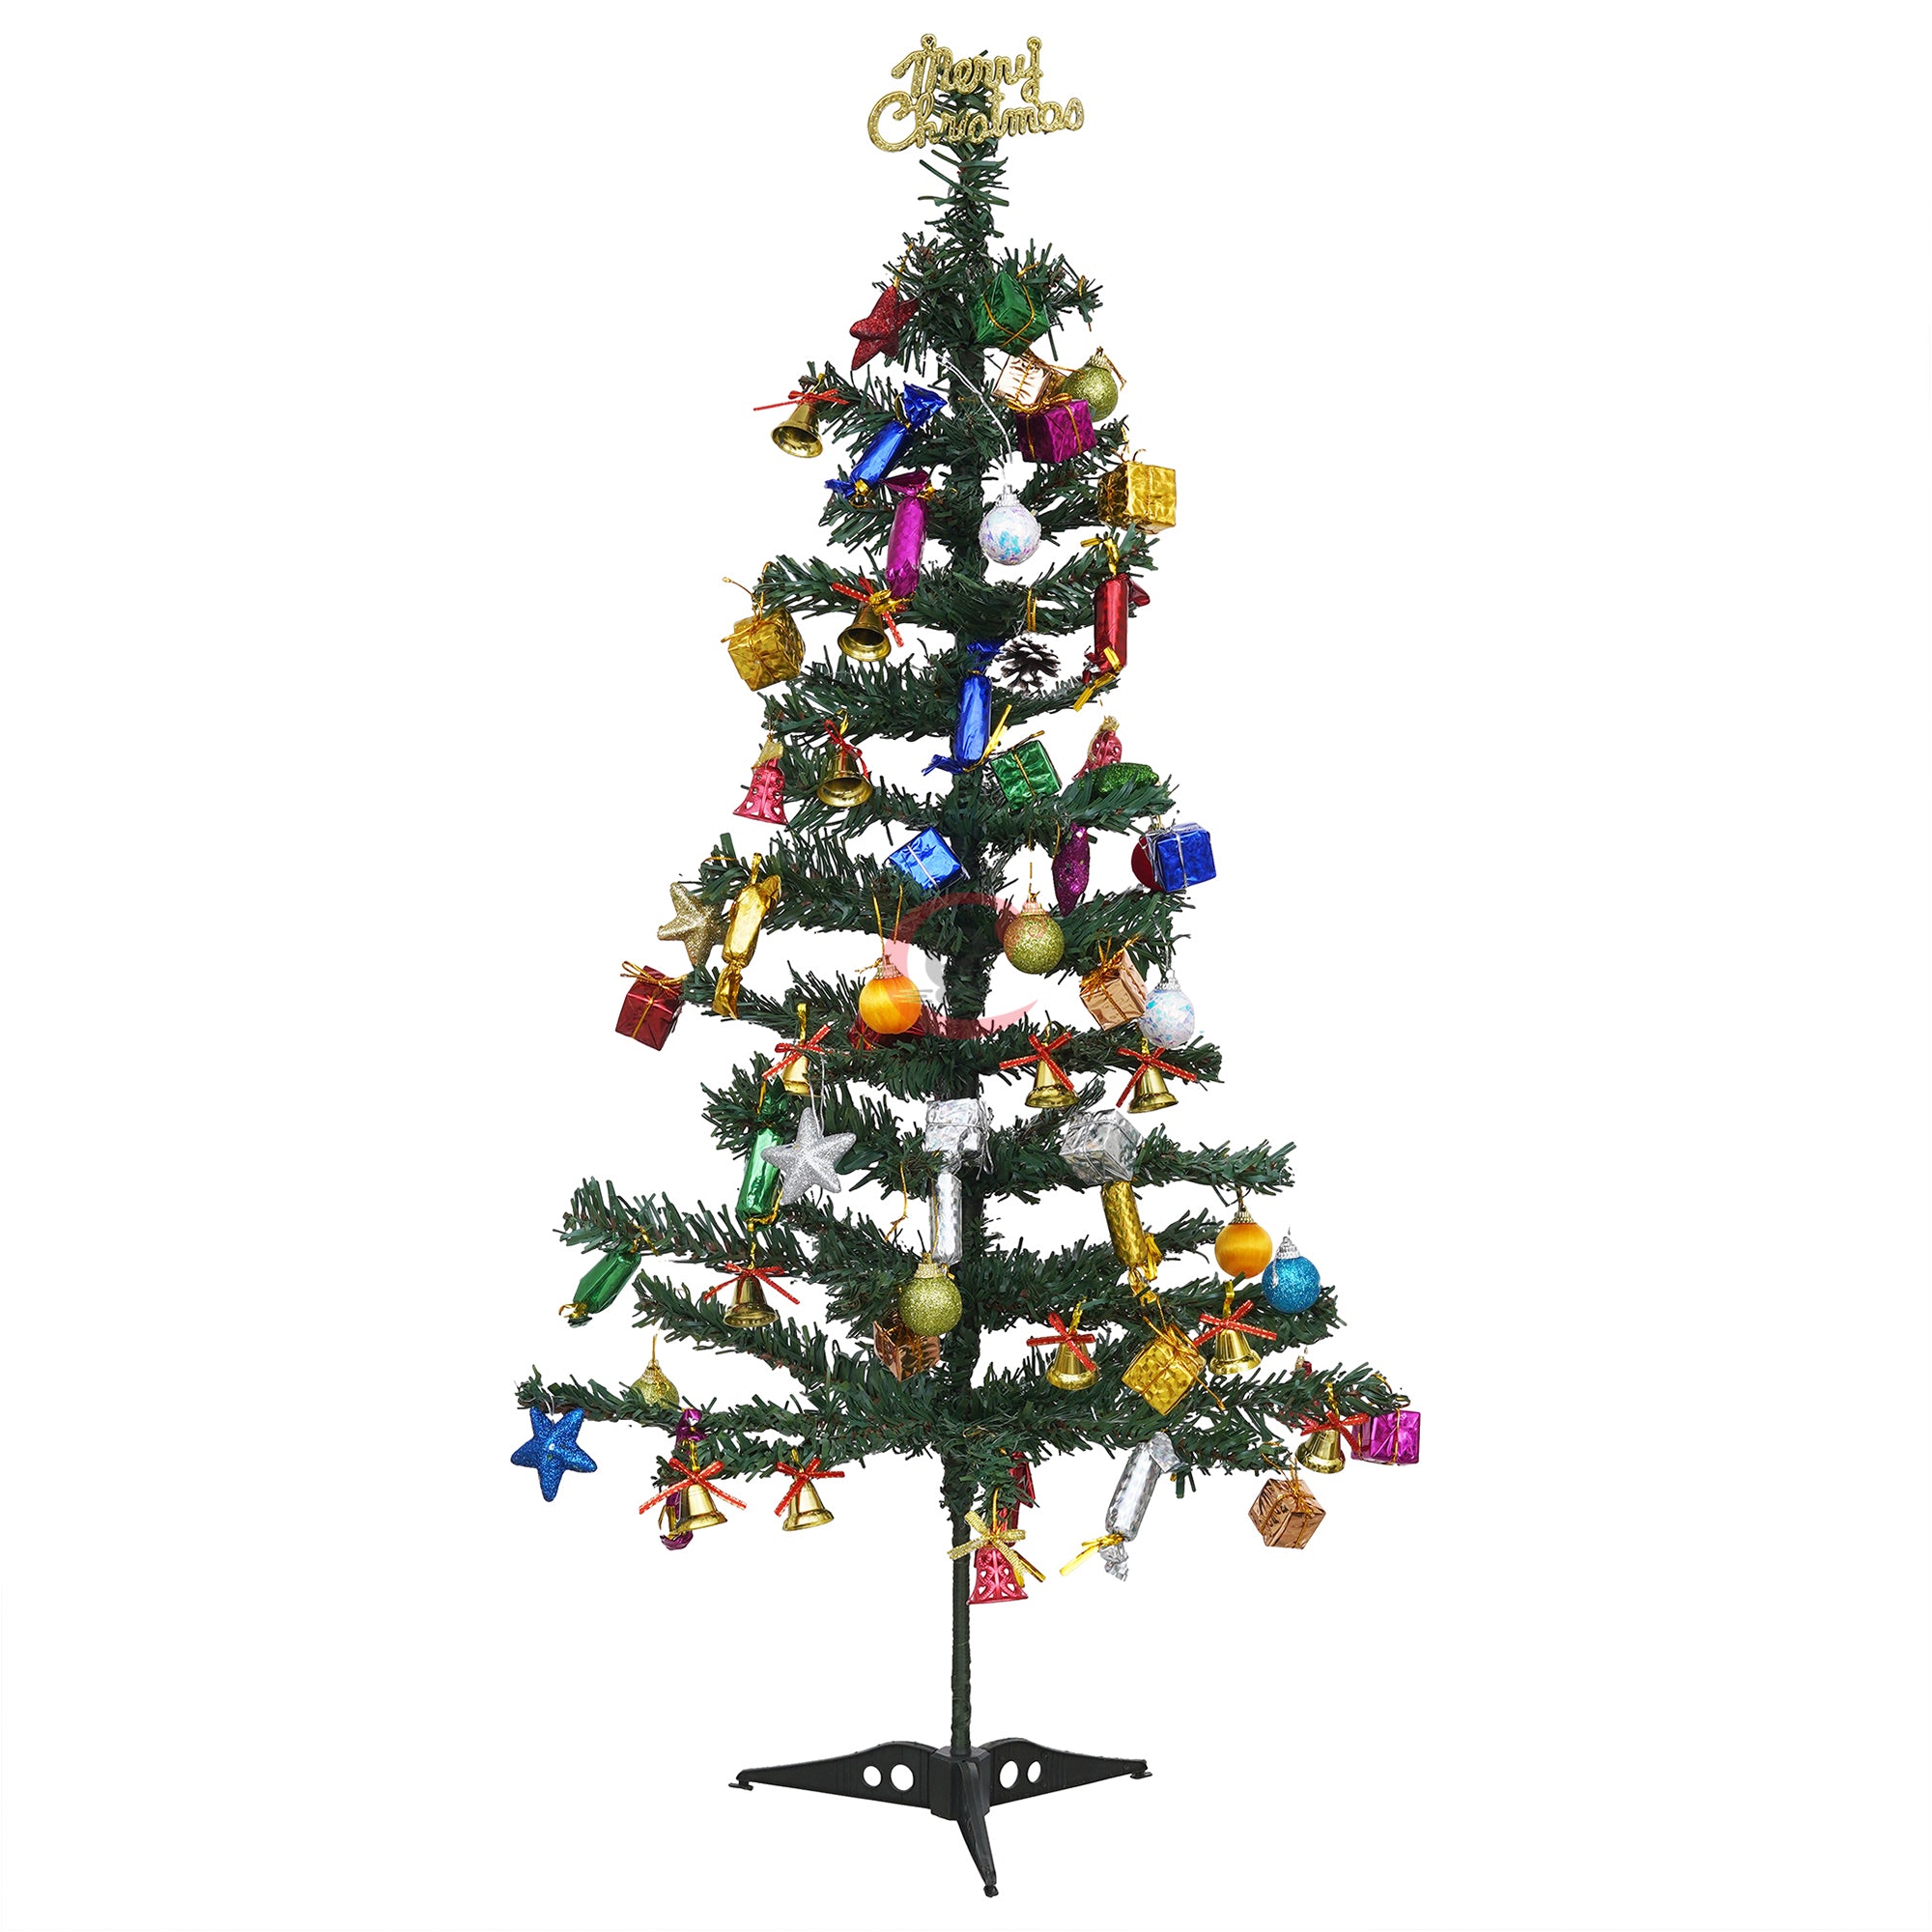 eCraftIndia 4 Feet Green Artificial Christmas Tree Xmas Pine Tree with Stand and 60 Christmas Decoration Ornaments Props - Merry Christmas Decoration Item for Home, Office, and Church 2